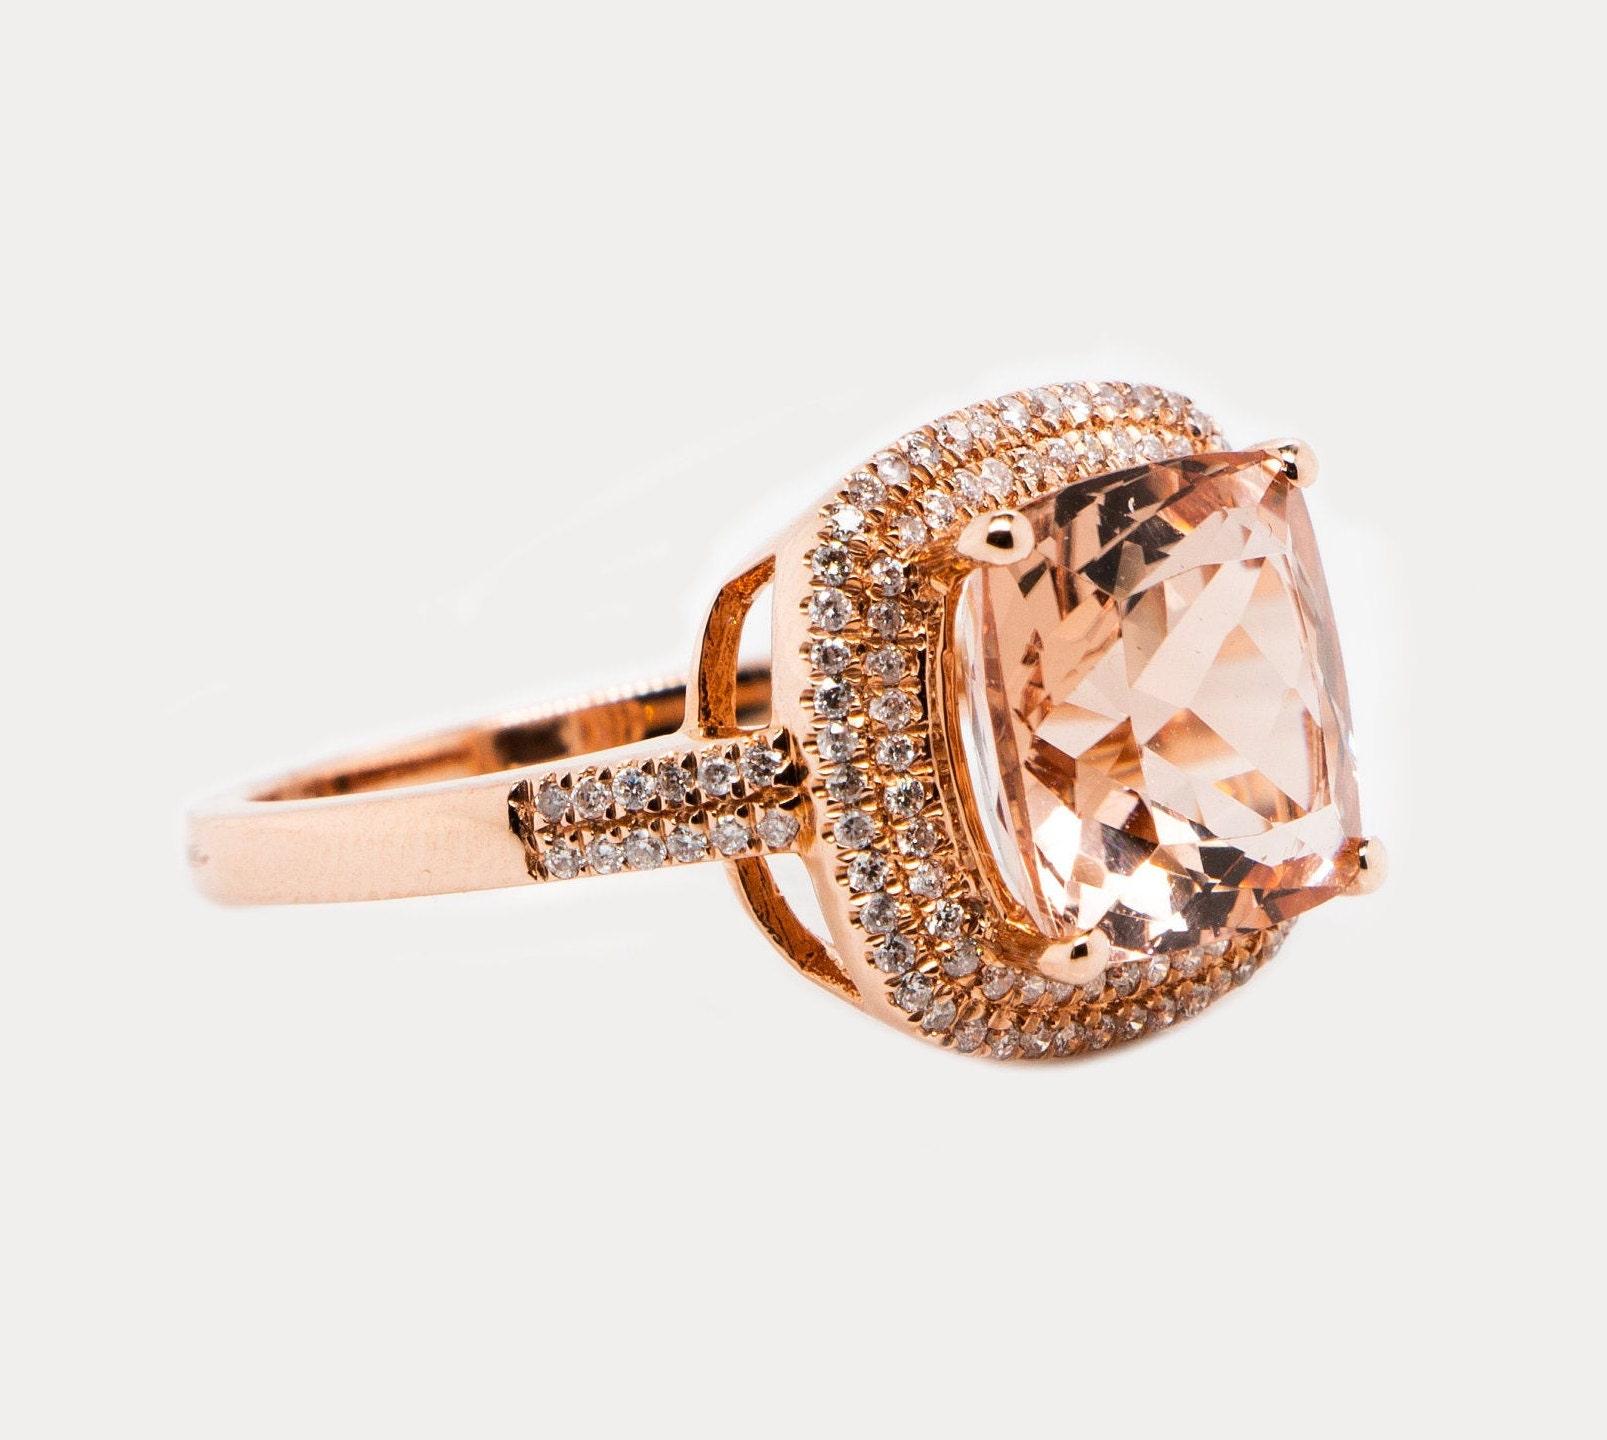 This is a gorgeous natural 4.40carat morganite and diamond ring set in solid 14K Rose Gold. The natural 10MM cushion cut morganite (AAA quality gem) has an excellent peachy pink color and is surrounded by a double halo of round cut white diamonds.